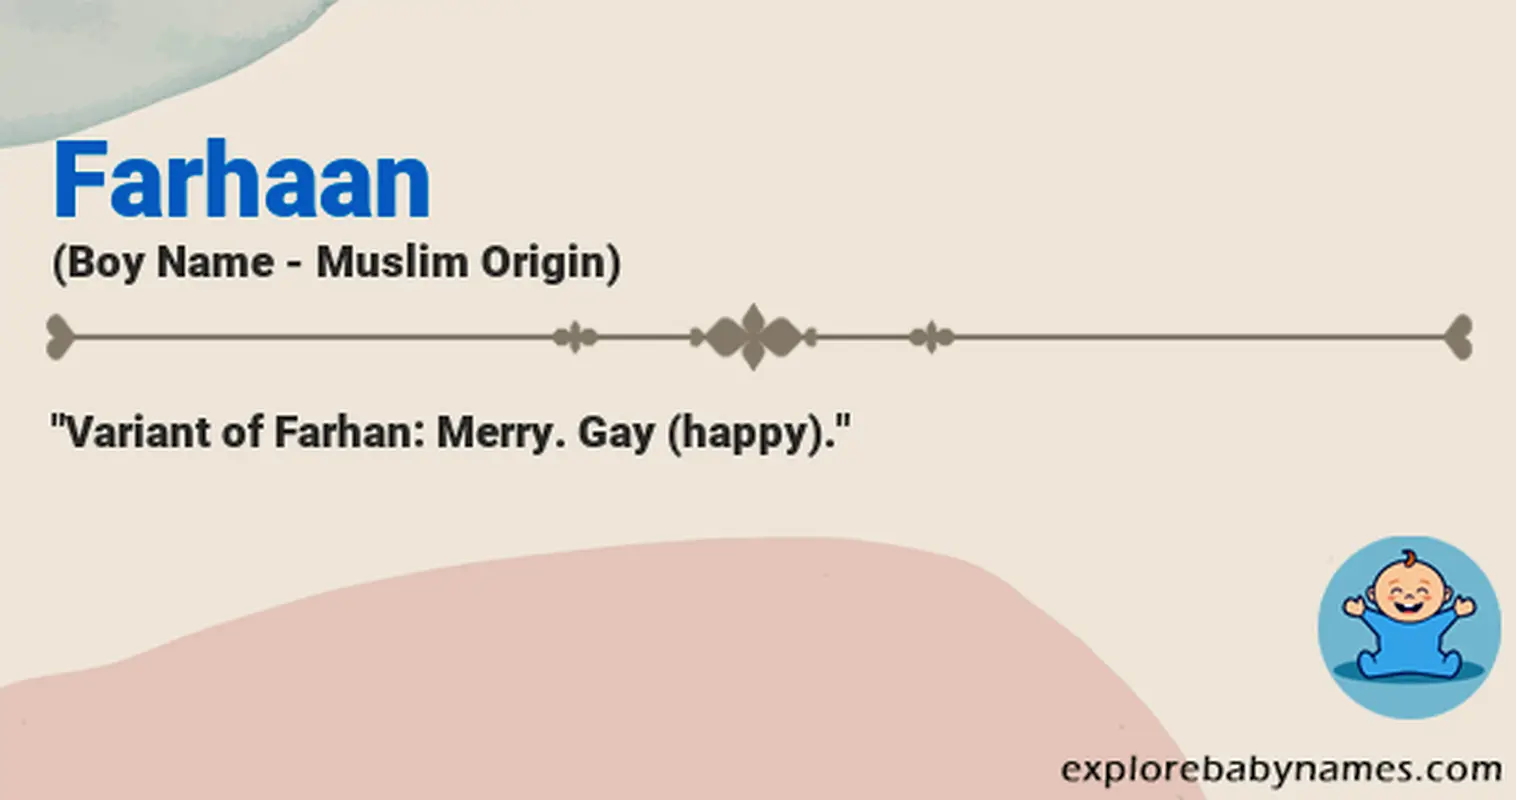 Meaning of Farhaan